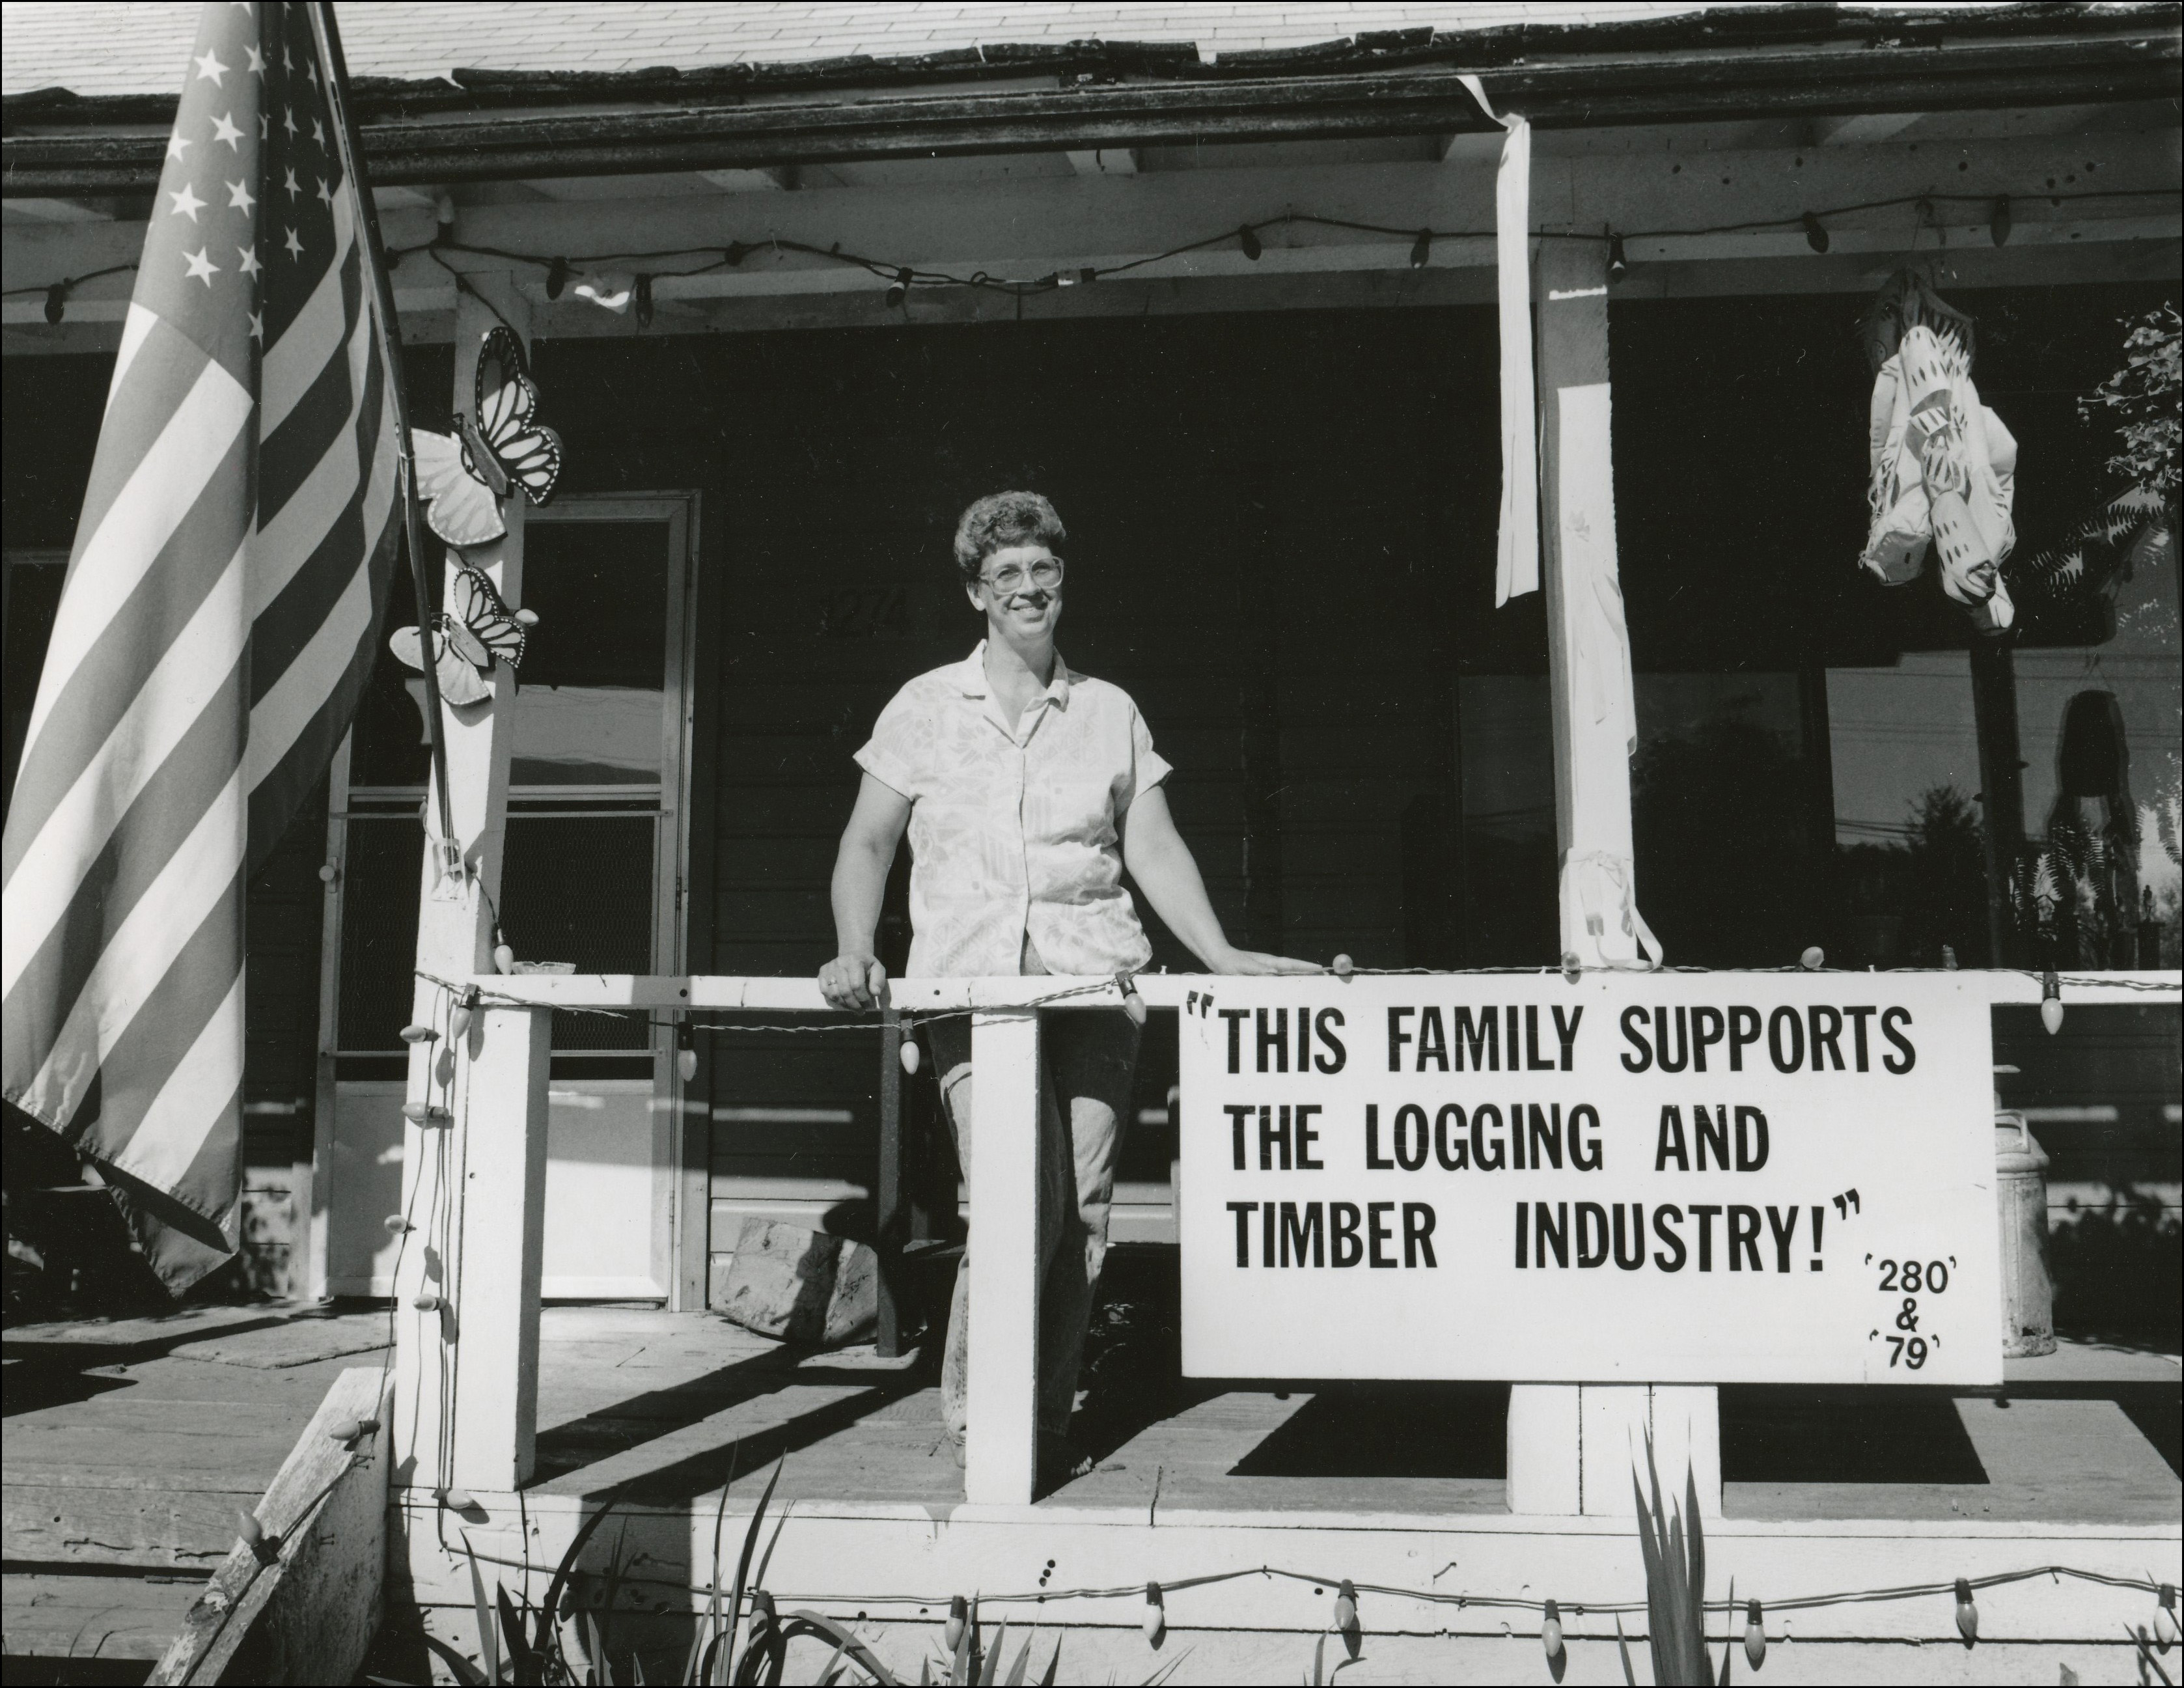 Woman standing on her front porch. American flag hanging up and a sign that says "this family supports the logging and timber industry"